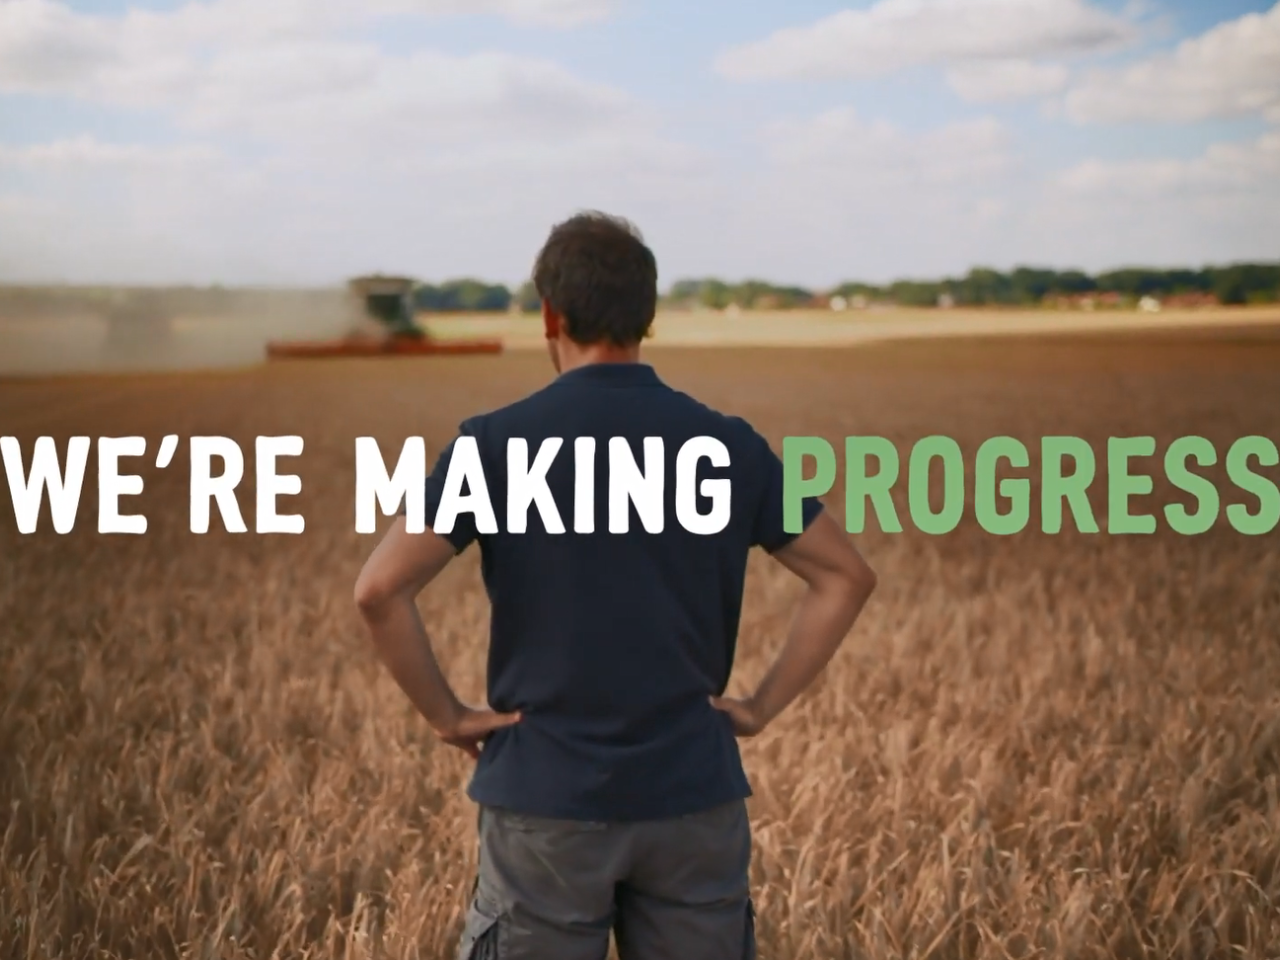 "We're Making Progress" over a person, with hands on hips, looking out over a crop field.